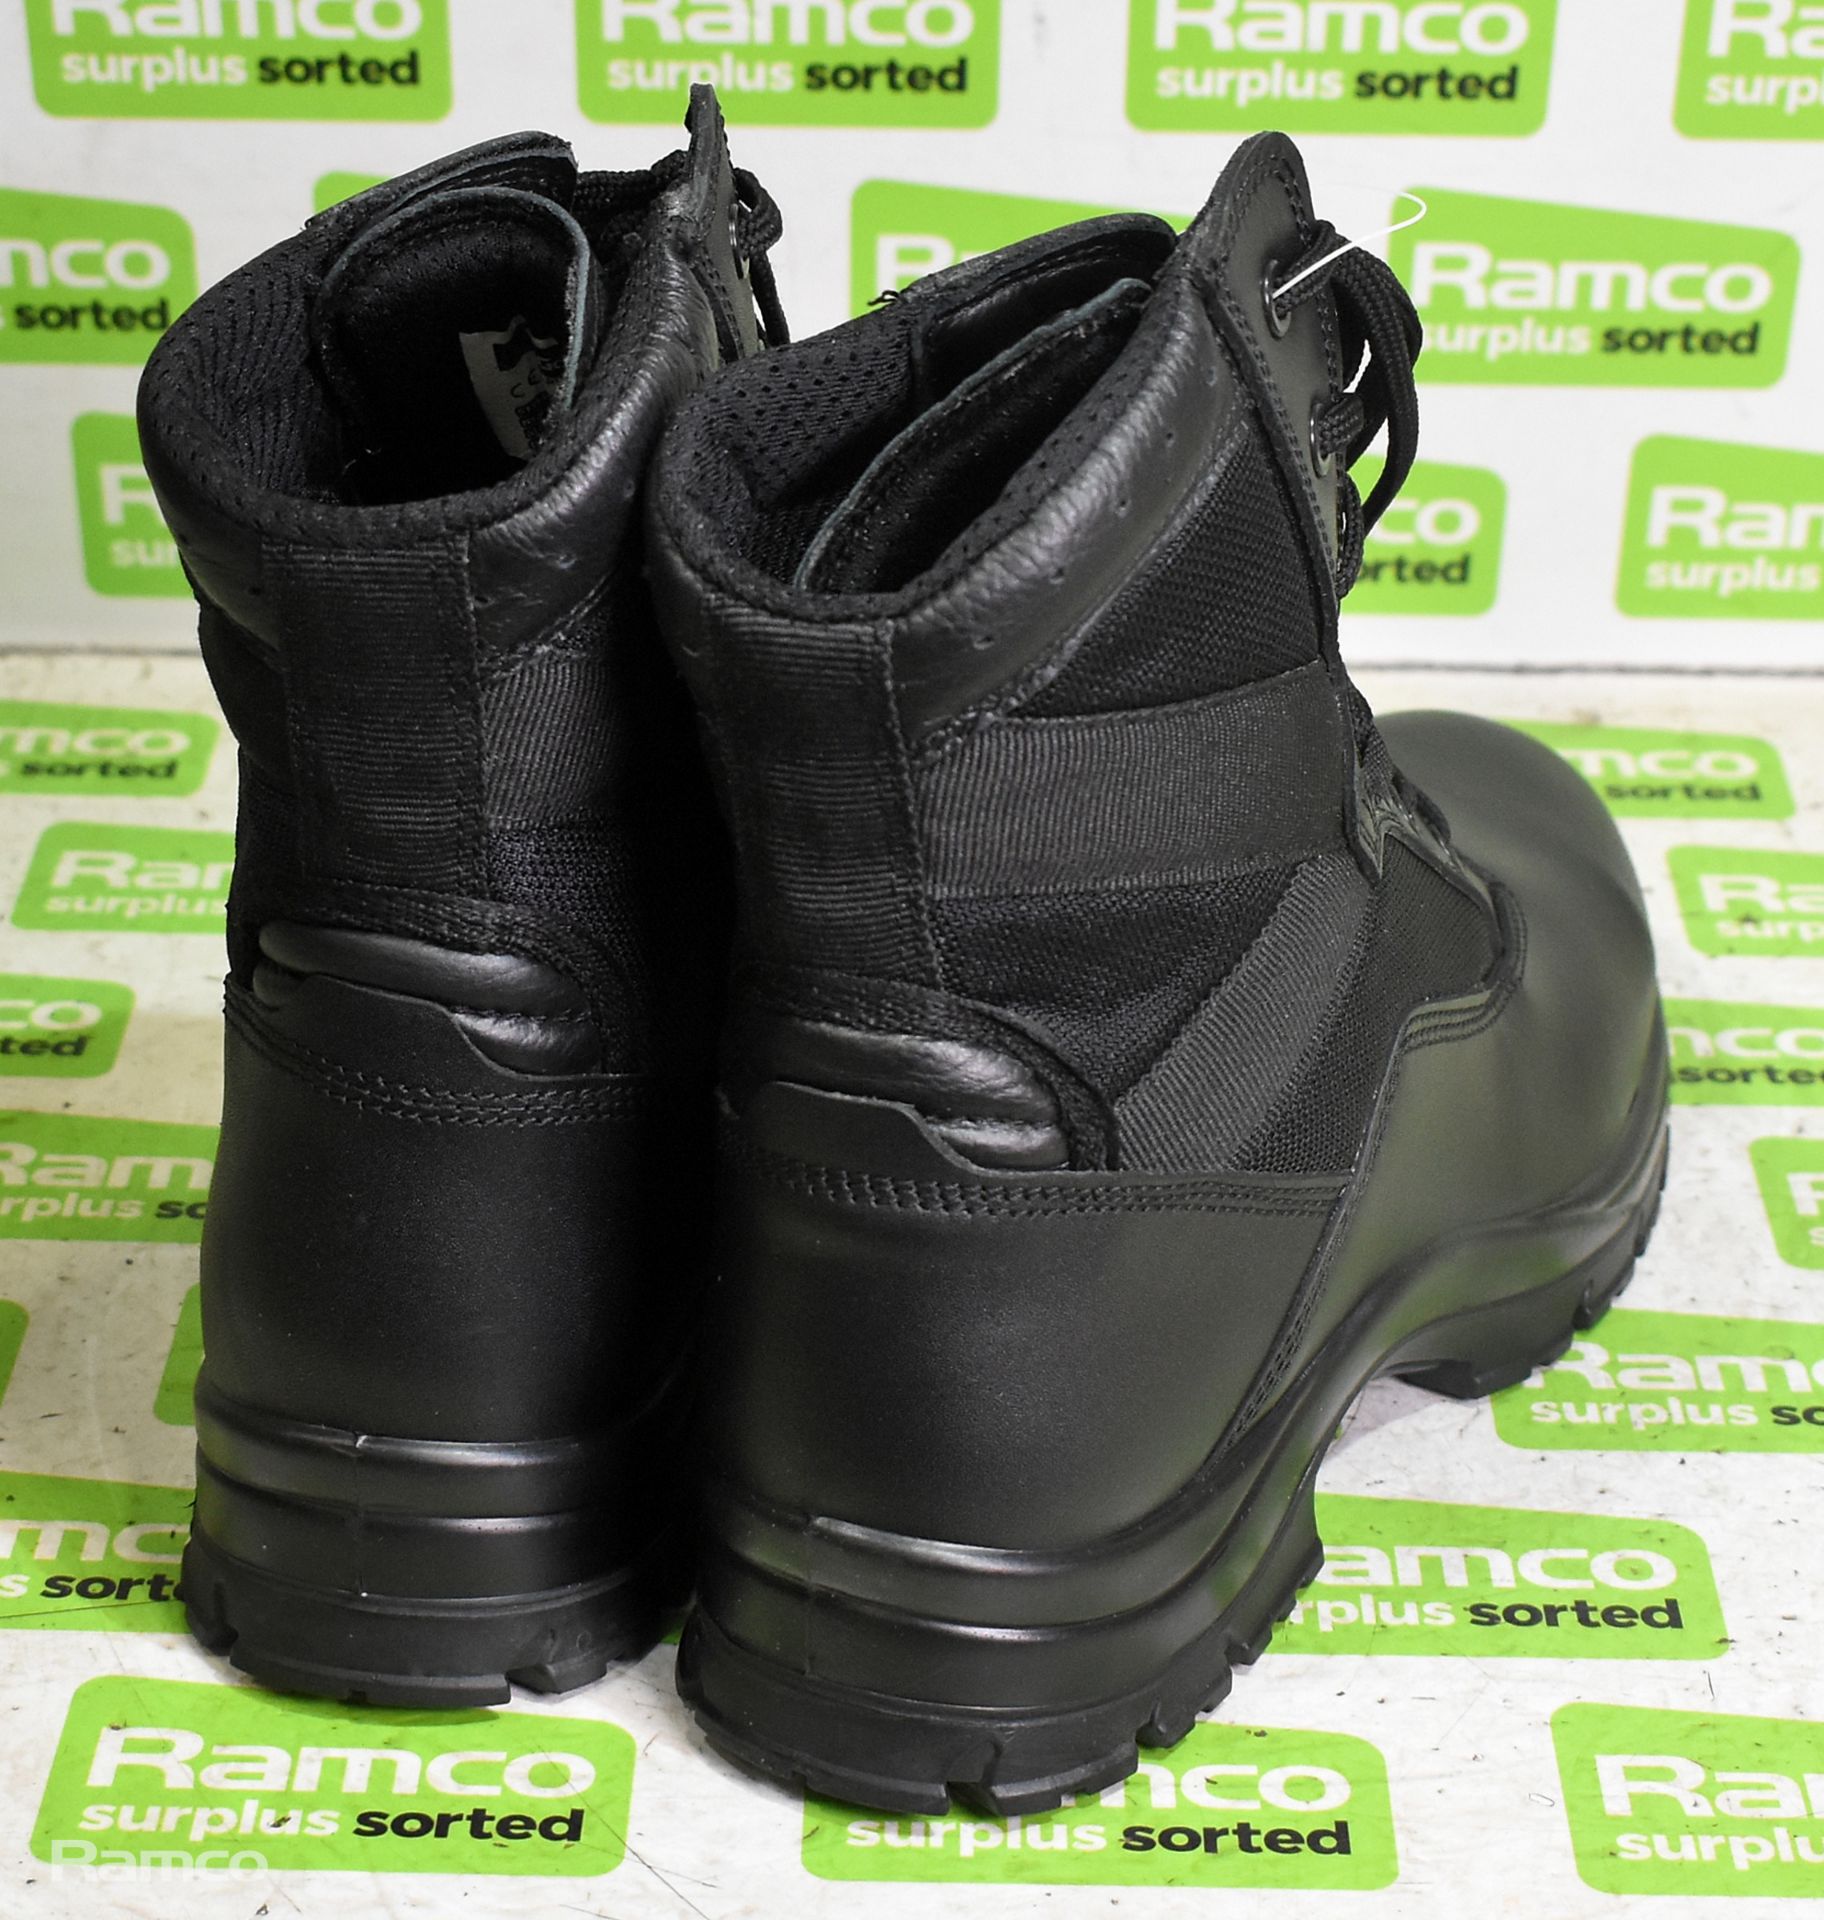 10x pairs of Goliath warm weather boots - Size 9L - Image 3 of 6